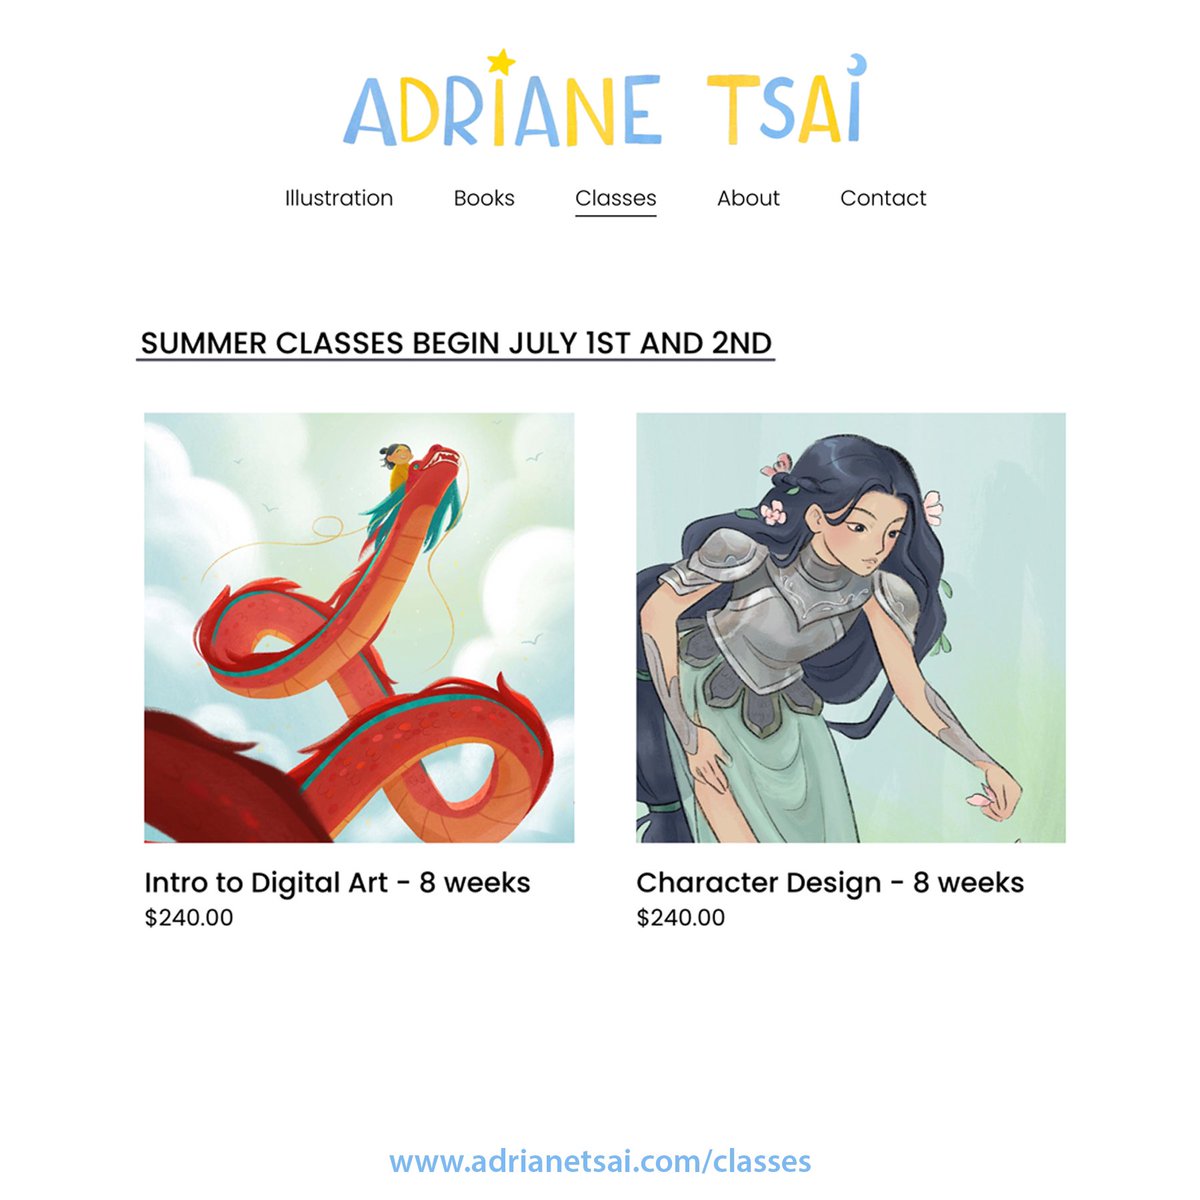 ✨SUMMER CLASSES NOW LIVE✨ Sessions start July 1st and 2nd! Classes are held online so you can join from anywhere in the world. Feel free to DM me with questions! More info at: adrianetsai.com/classes #artclass #onlineacourse #learnart